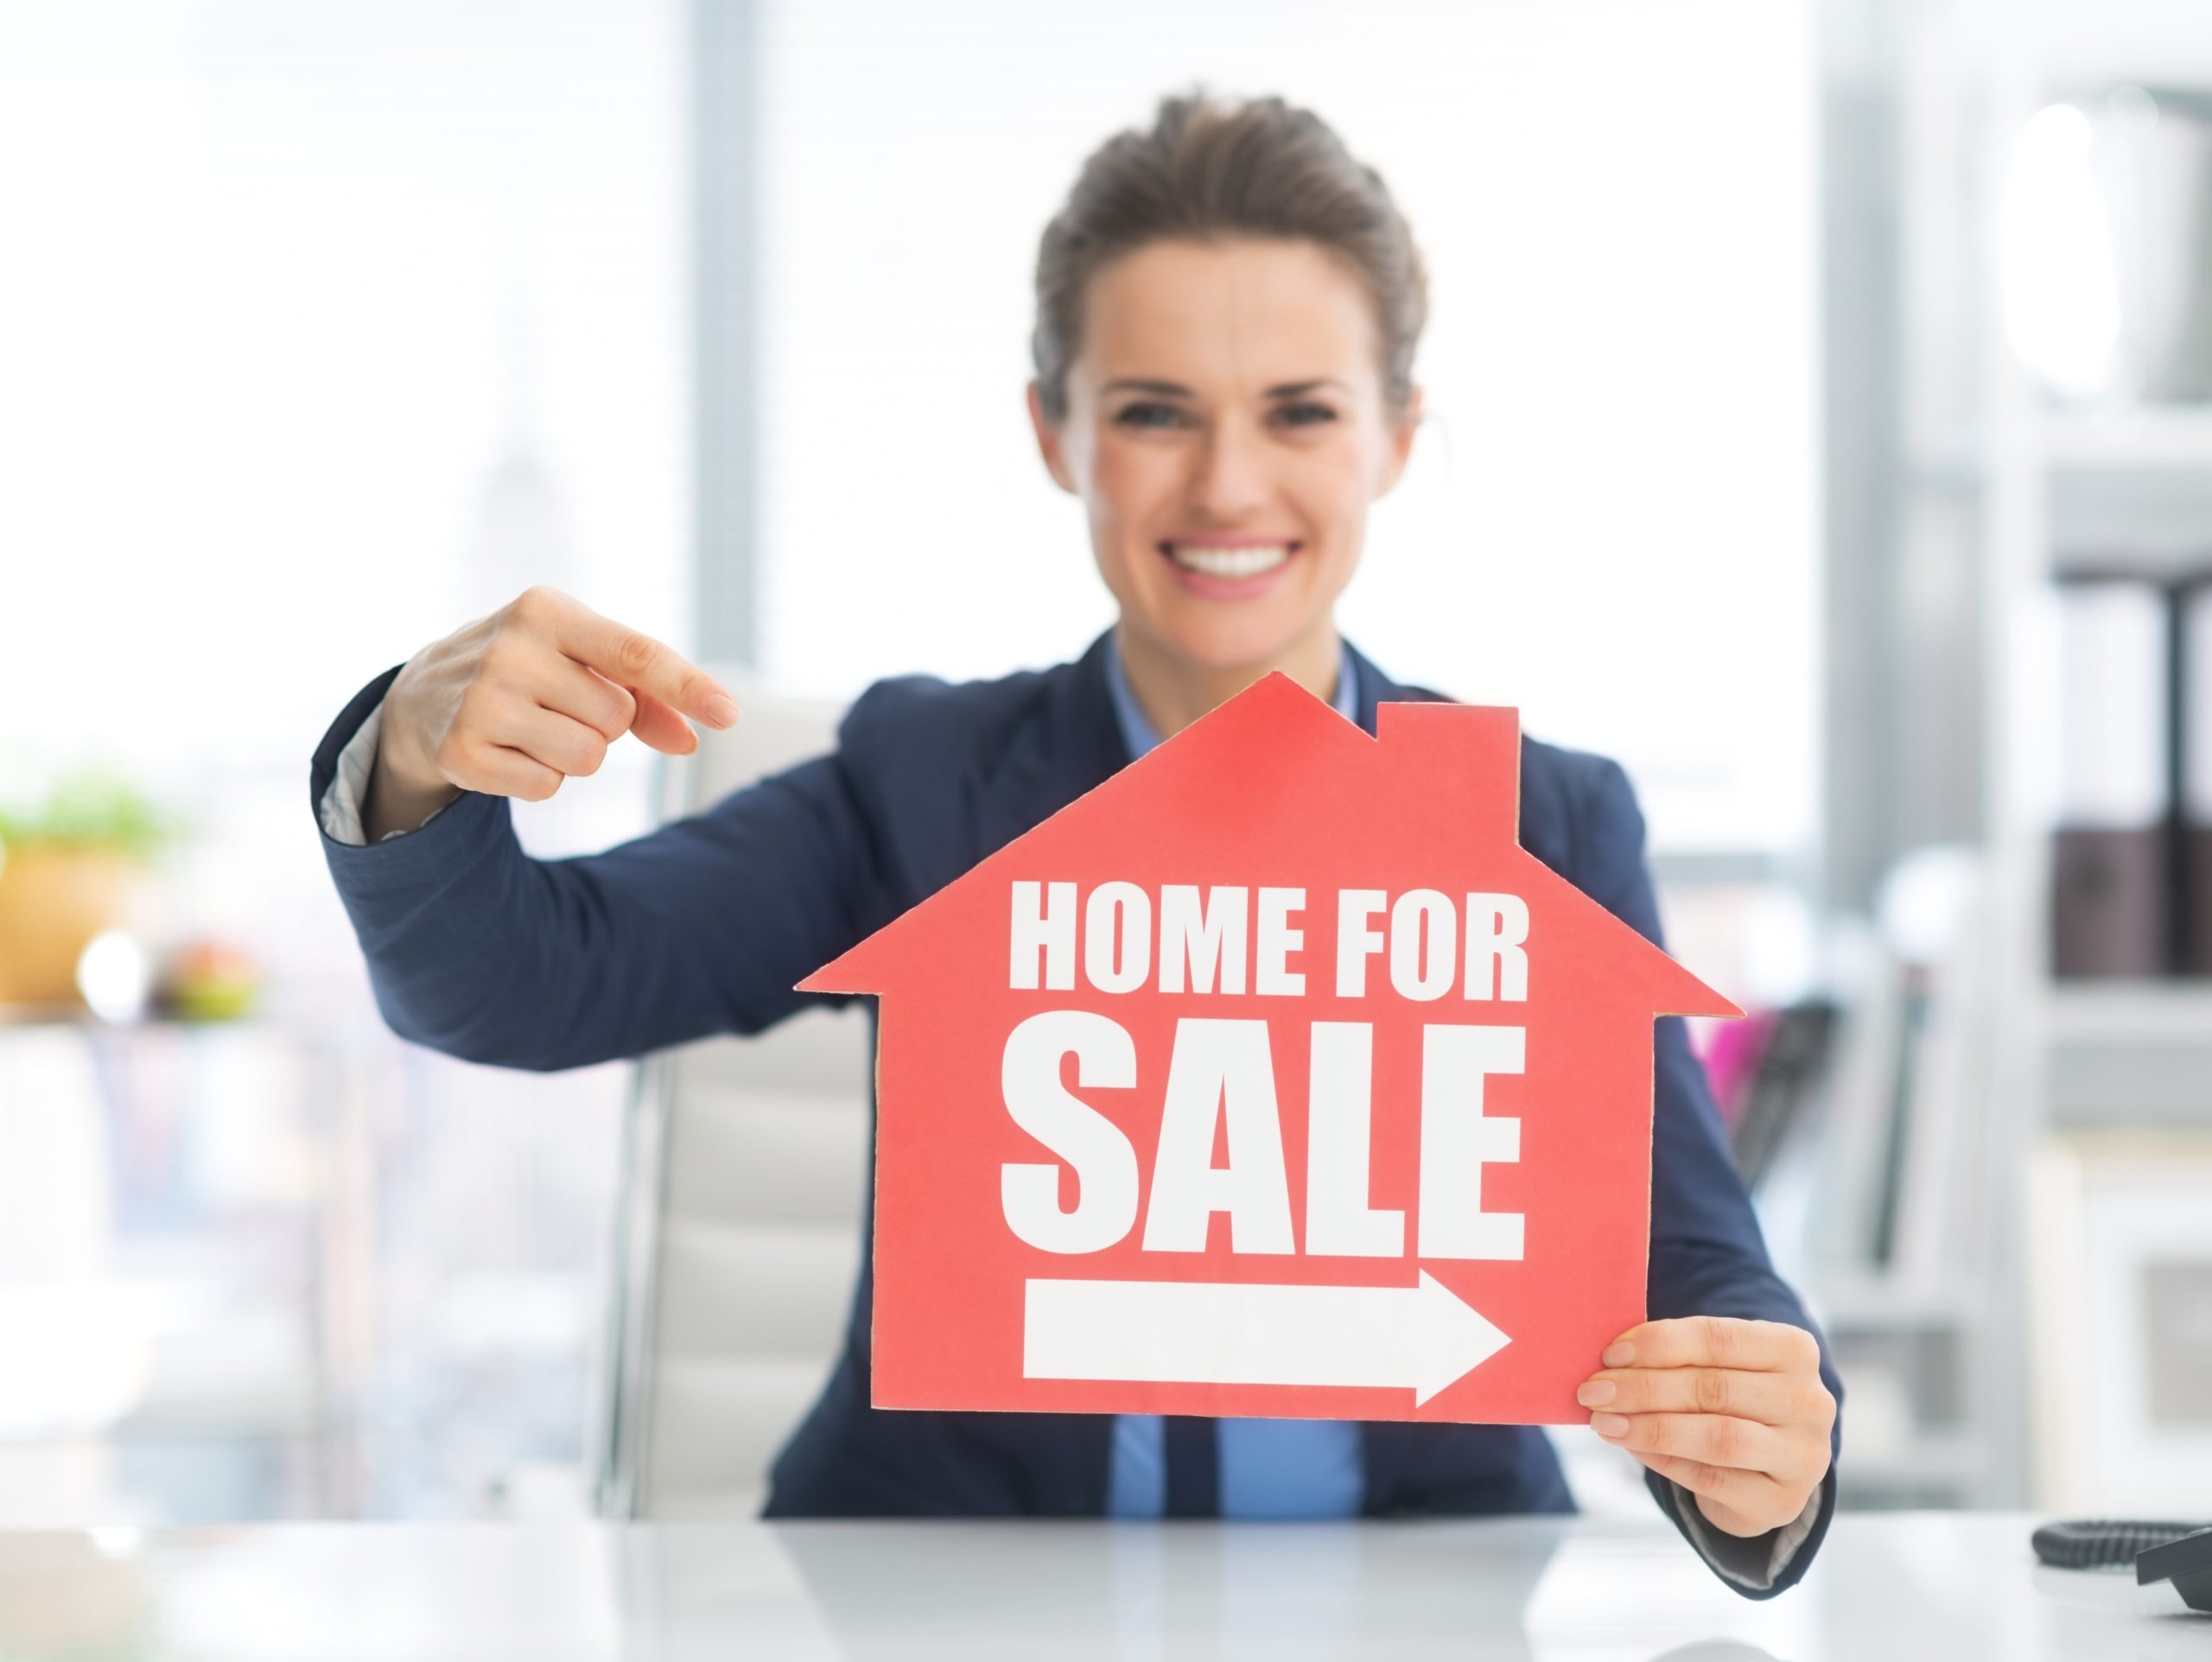 Realtor woman pointing to home for sale sign she is holding